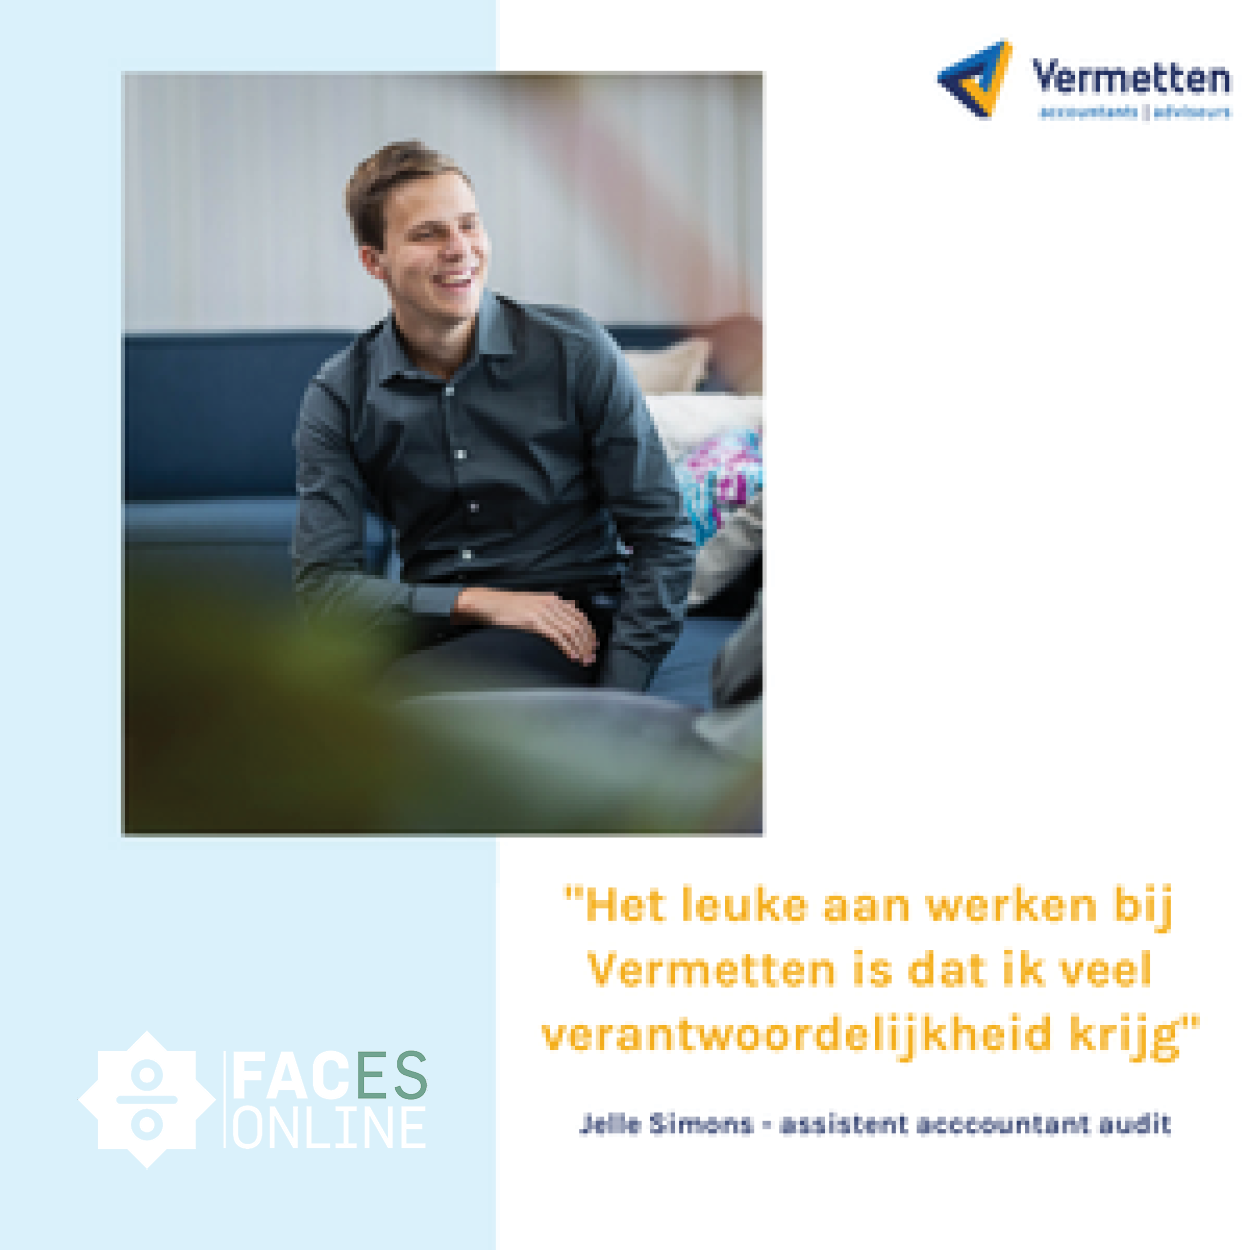 Working at Vermetten – By Jelle Simons